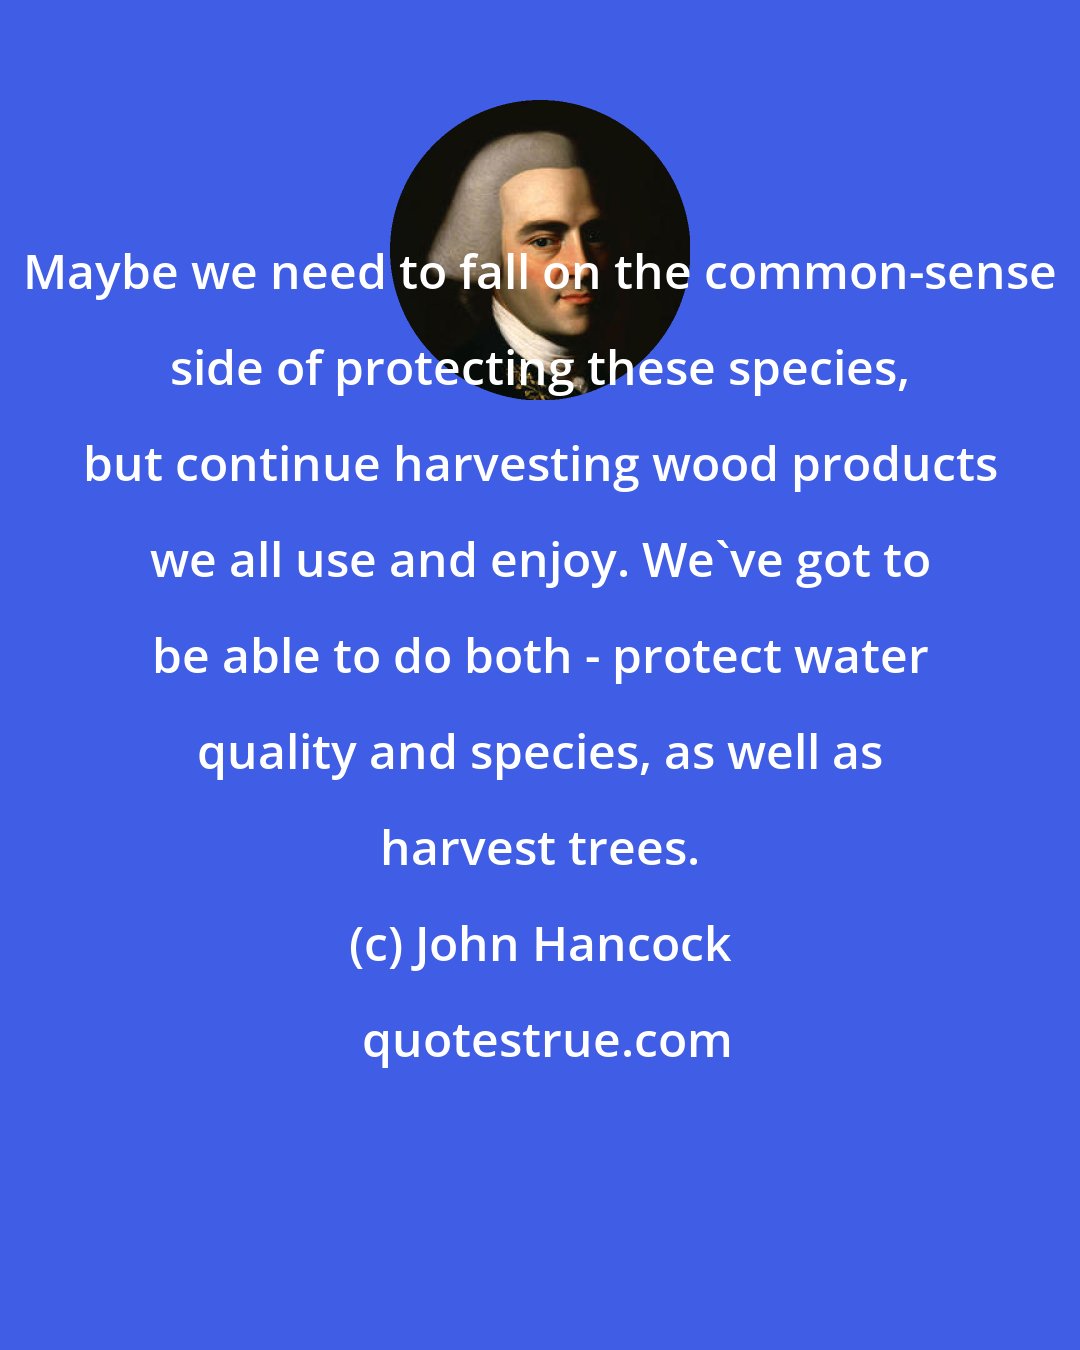 John Hancock: Maybe we need to fall on the common-sense side of protecting these species, but continue harvesting wood products we all use and enjoy. We've got to be able to do both - protect water quality and species, as well as harvest trees.